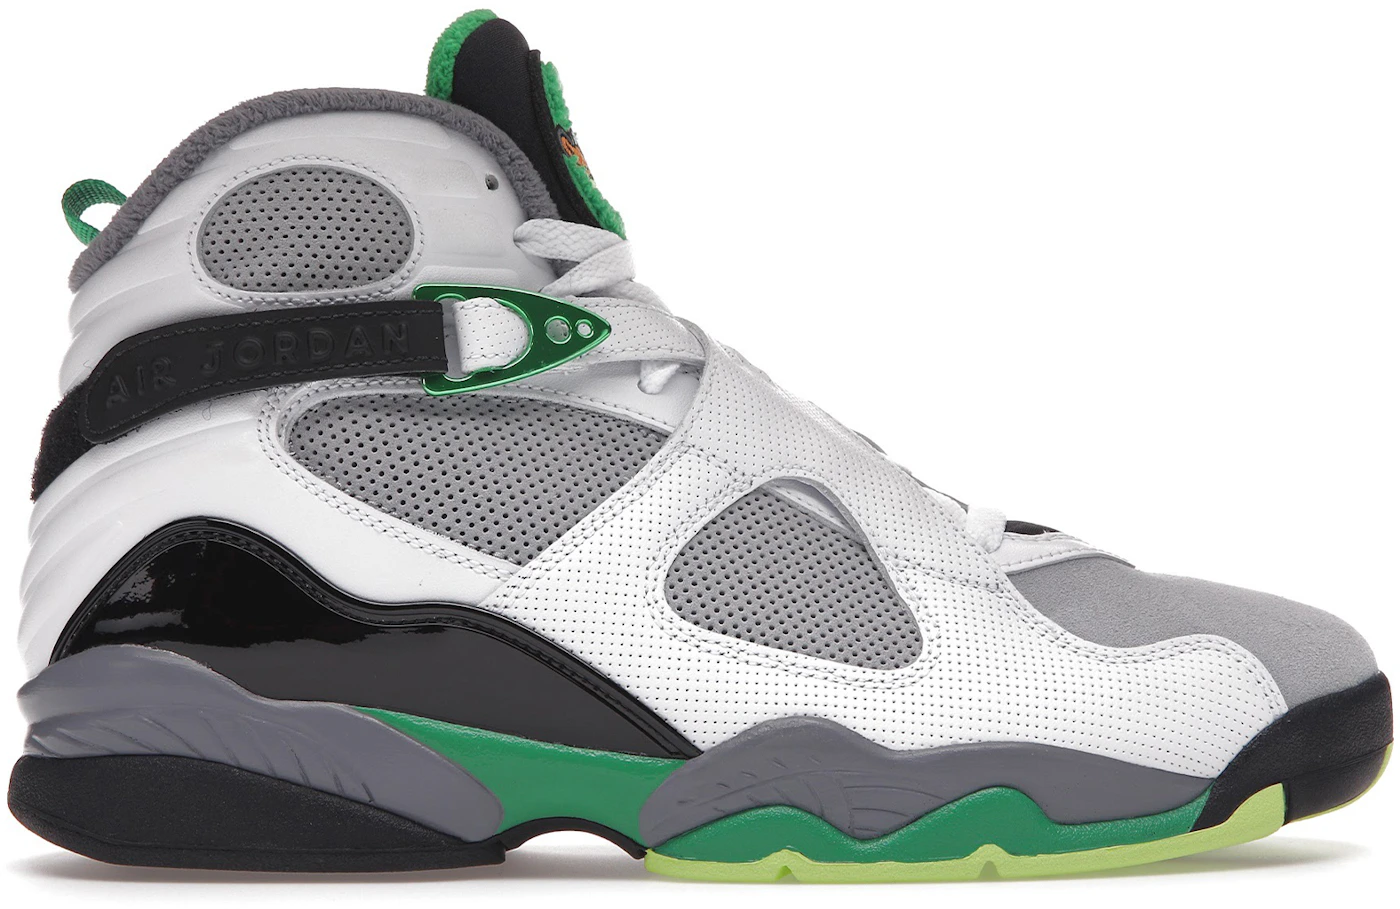 Air Jordan 8 “Playoffs” now available online !